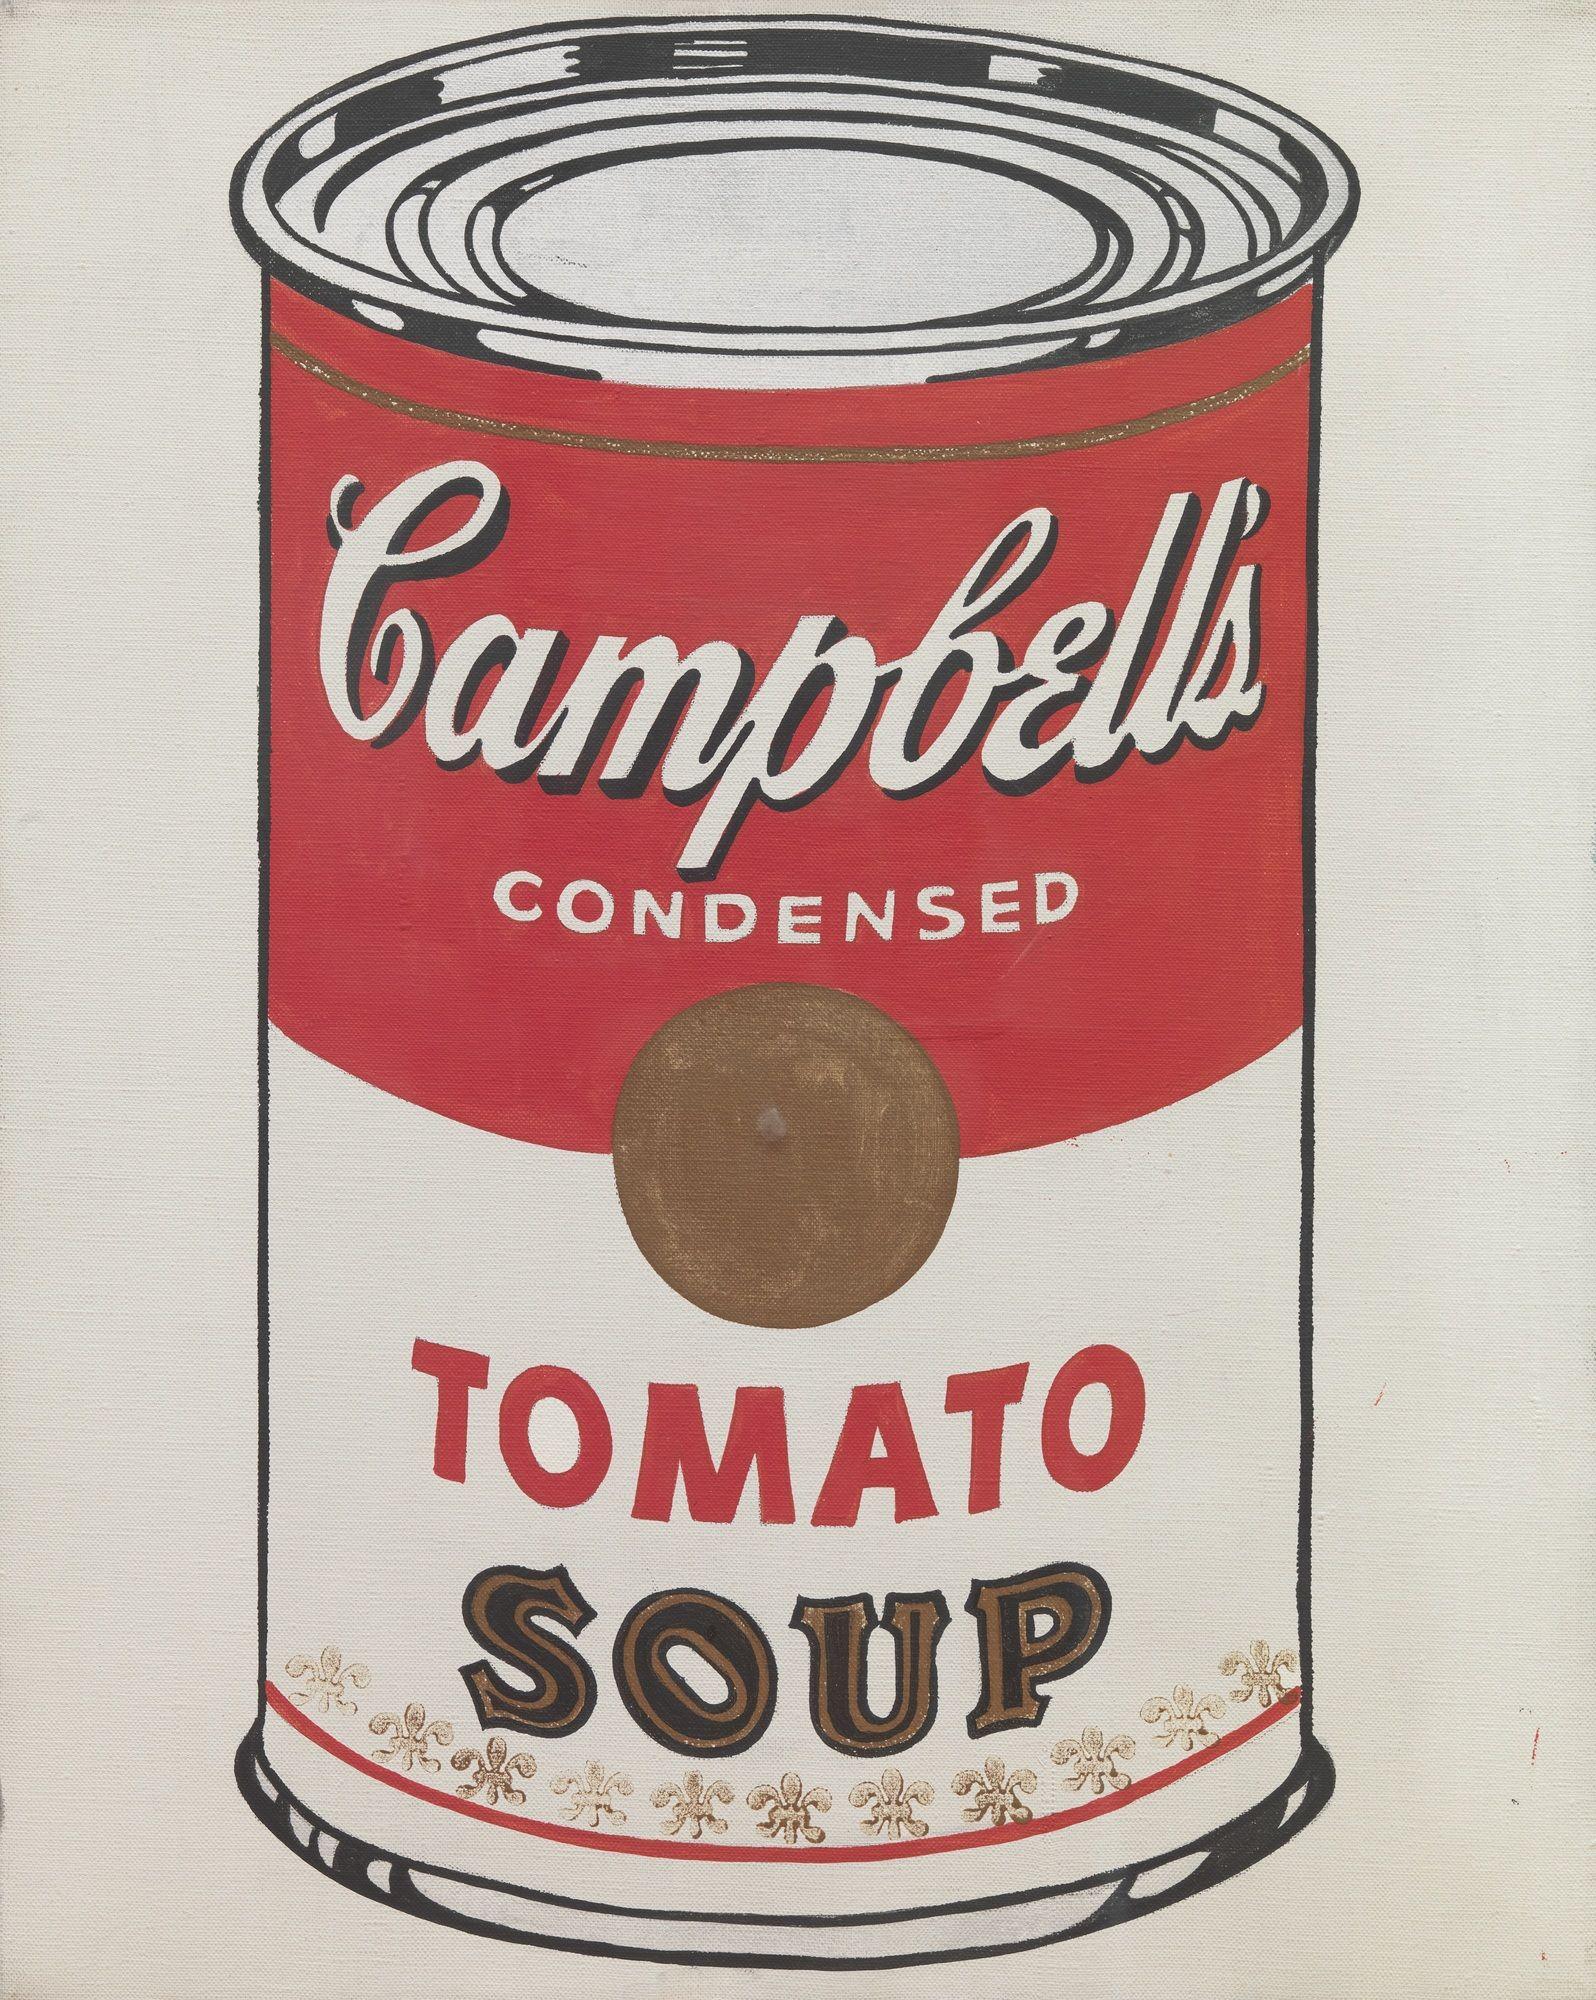 Andy Warhol (American, 1928–1987). Campbell's Soup Cans